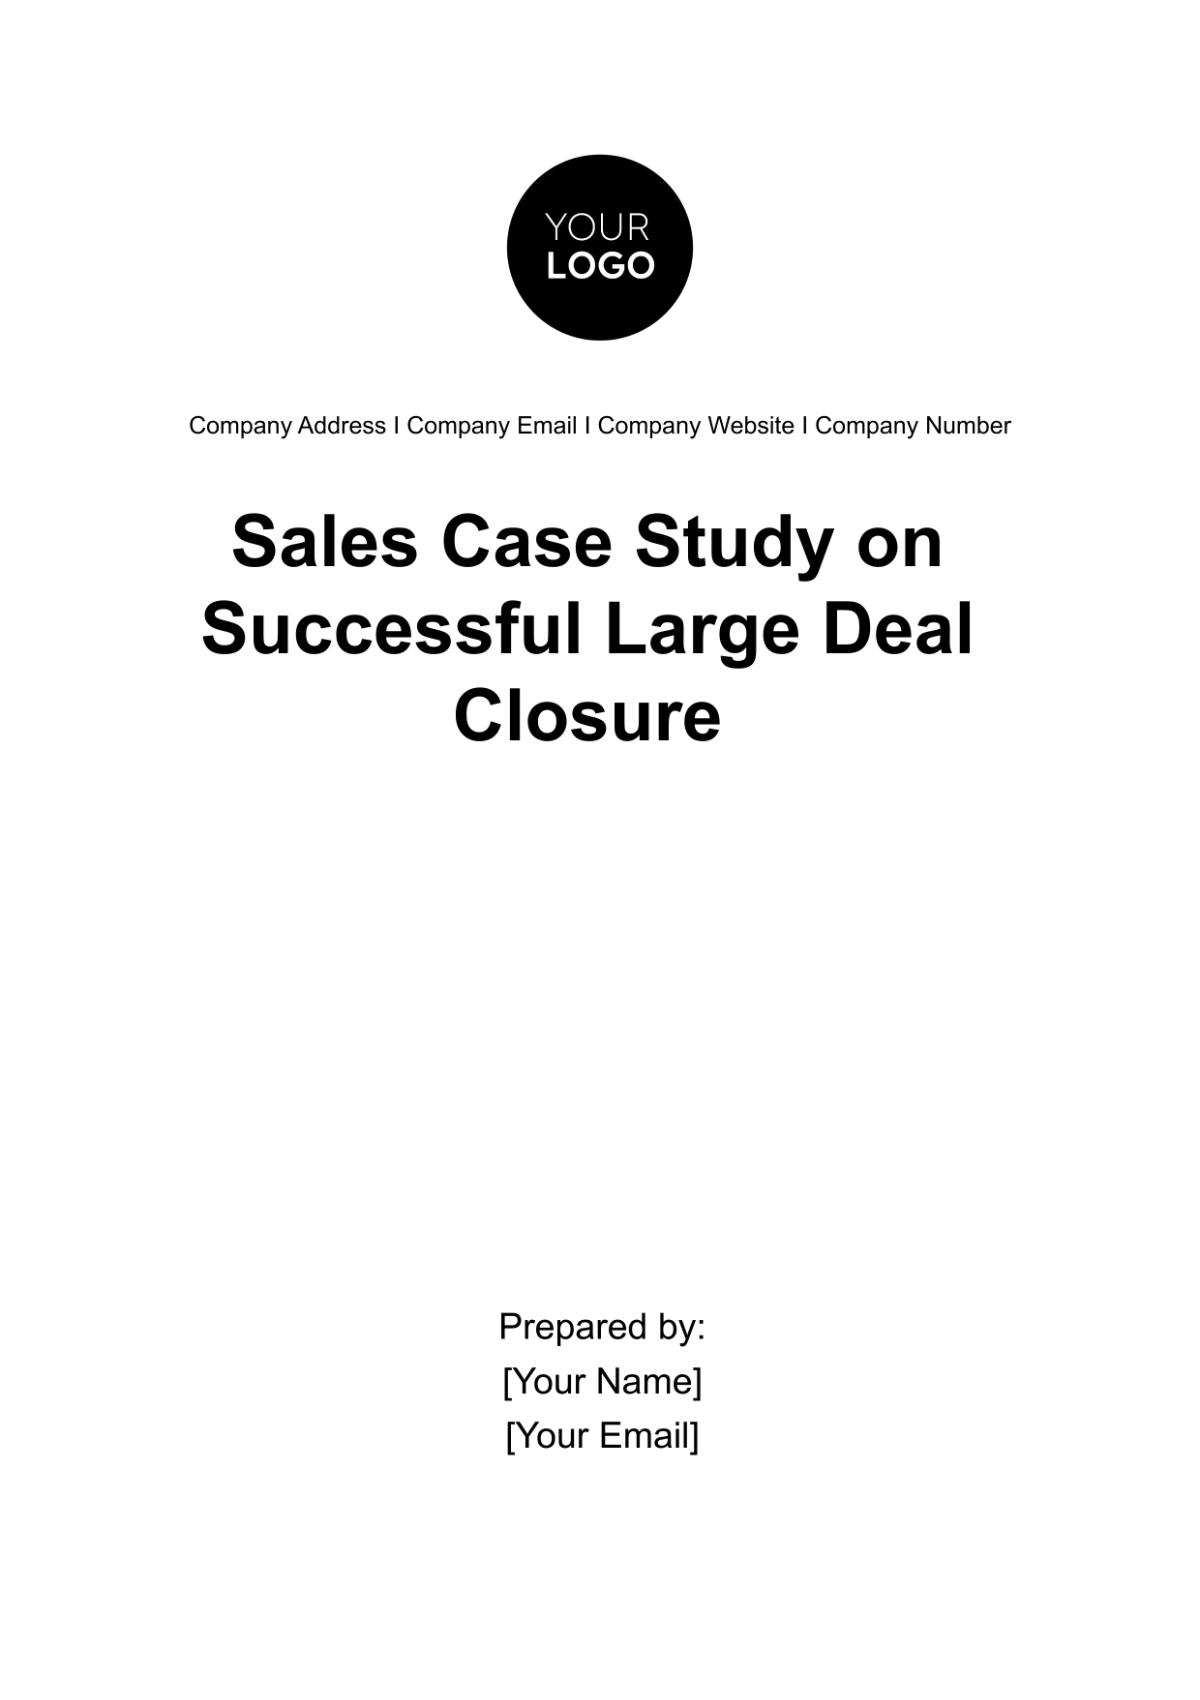 Sales Case Study on Successful Large Deal Closure Template